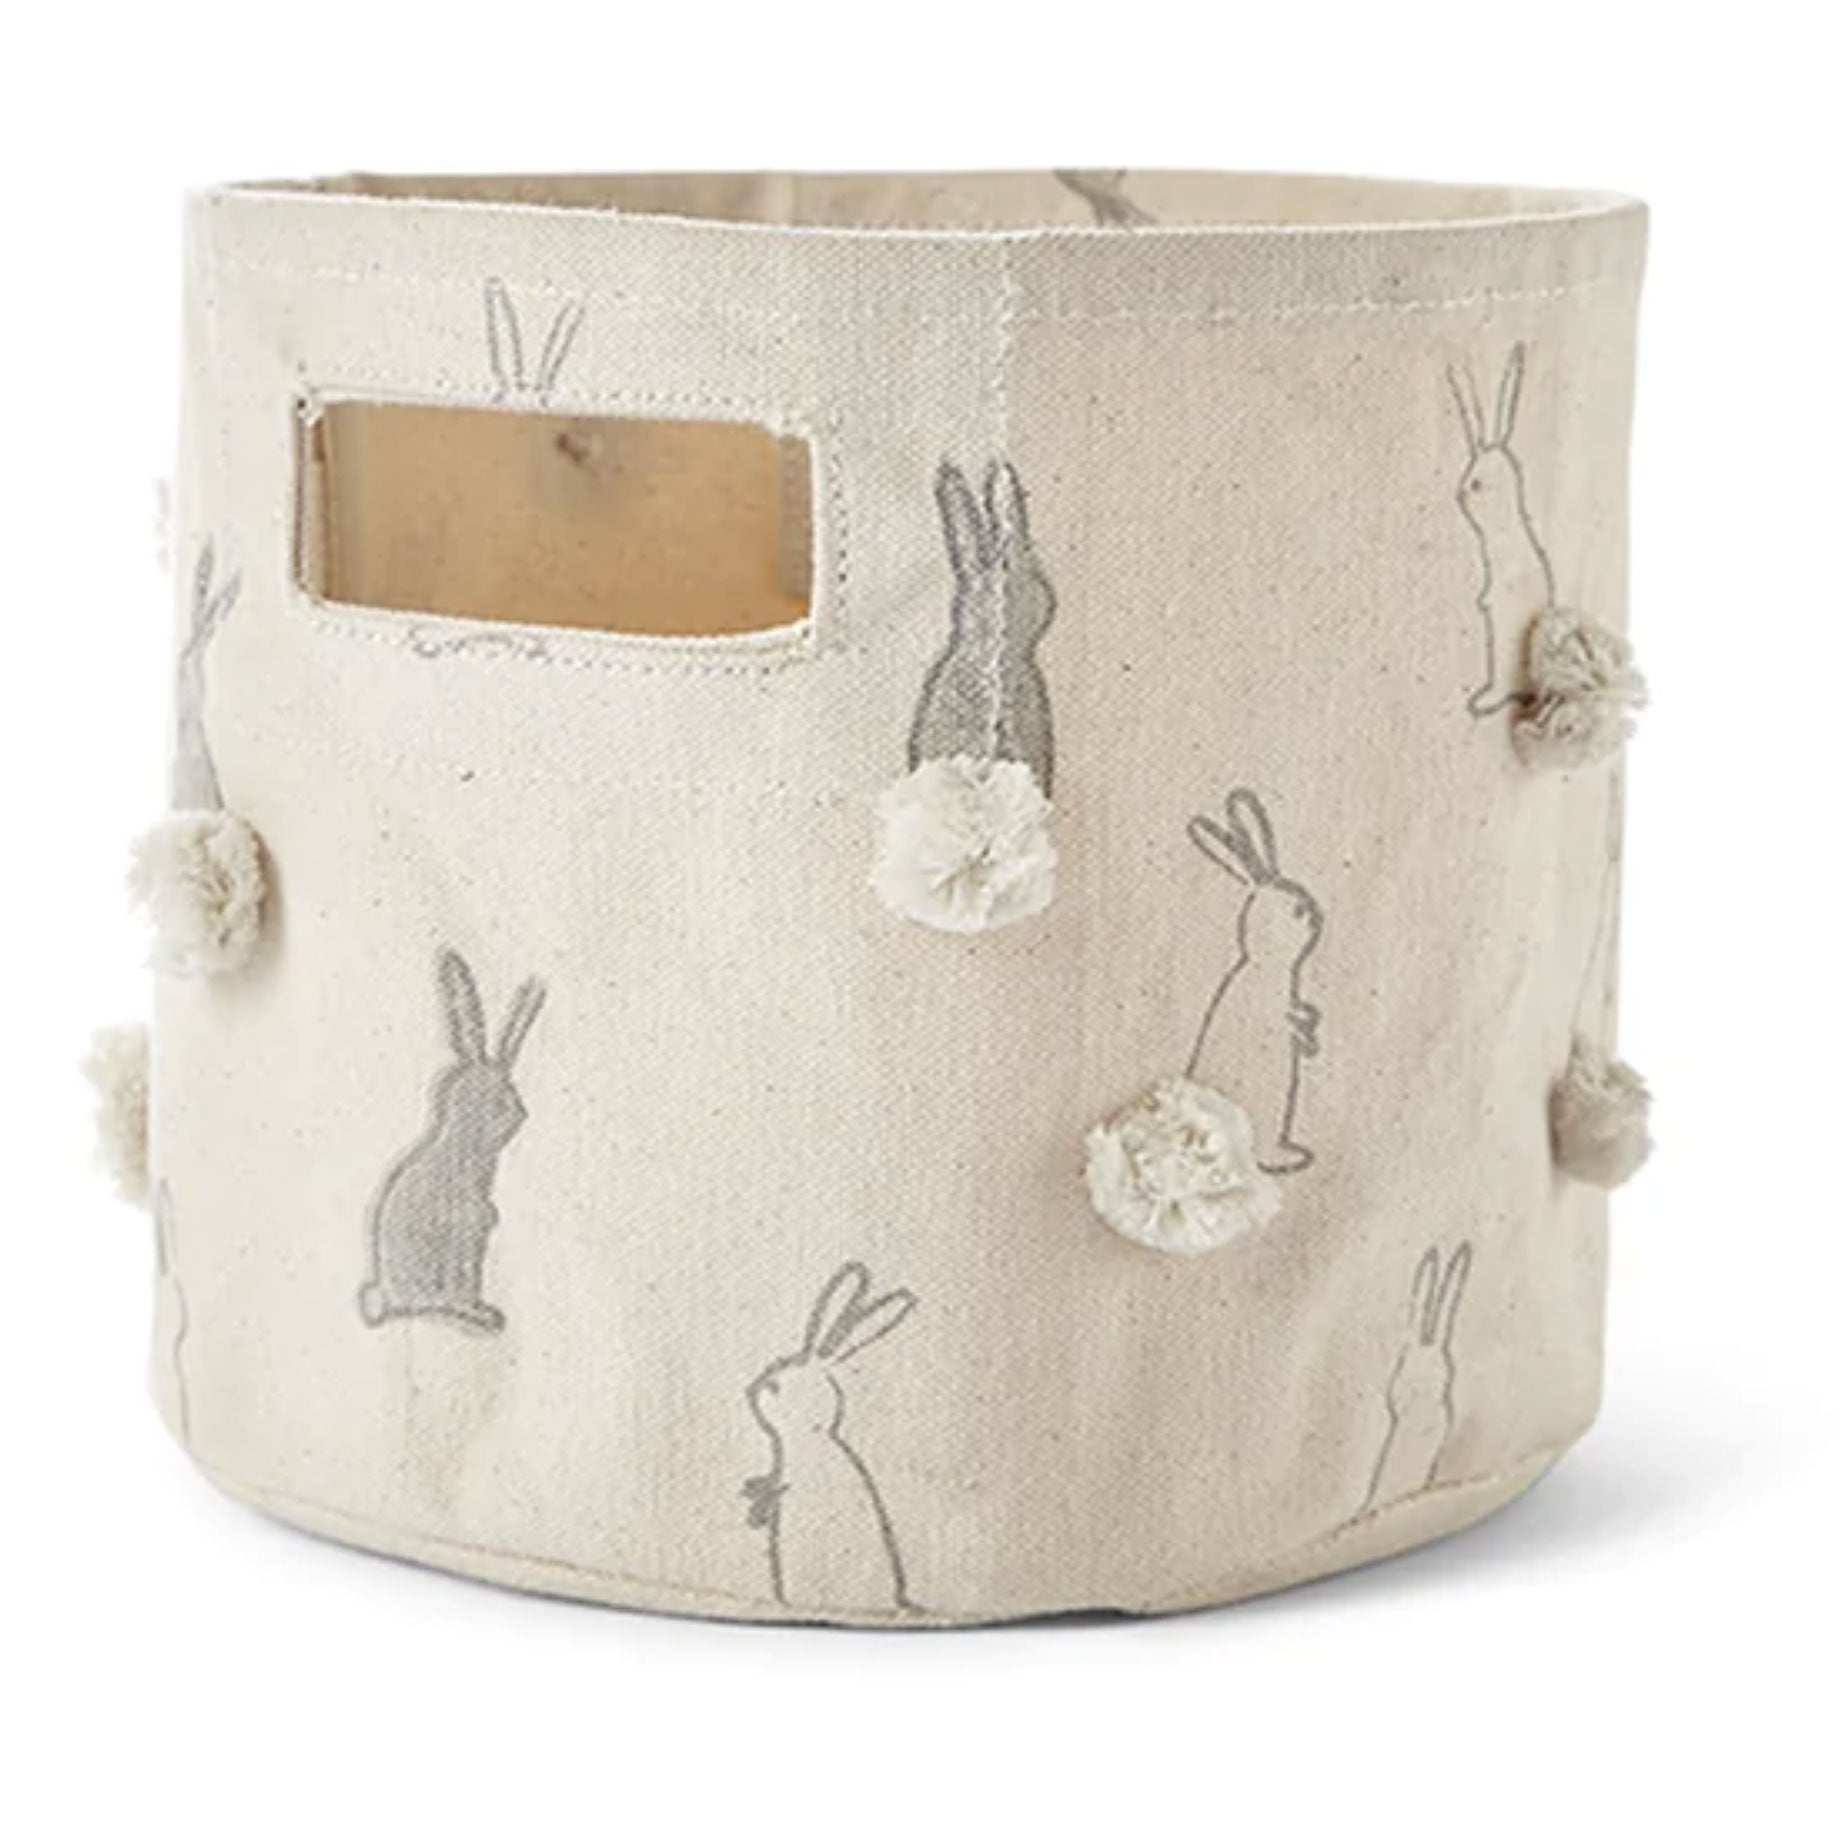 Pehr Mini Printed Storage Container - Bunny Hop at Bonjour Baby Baskets